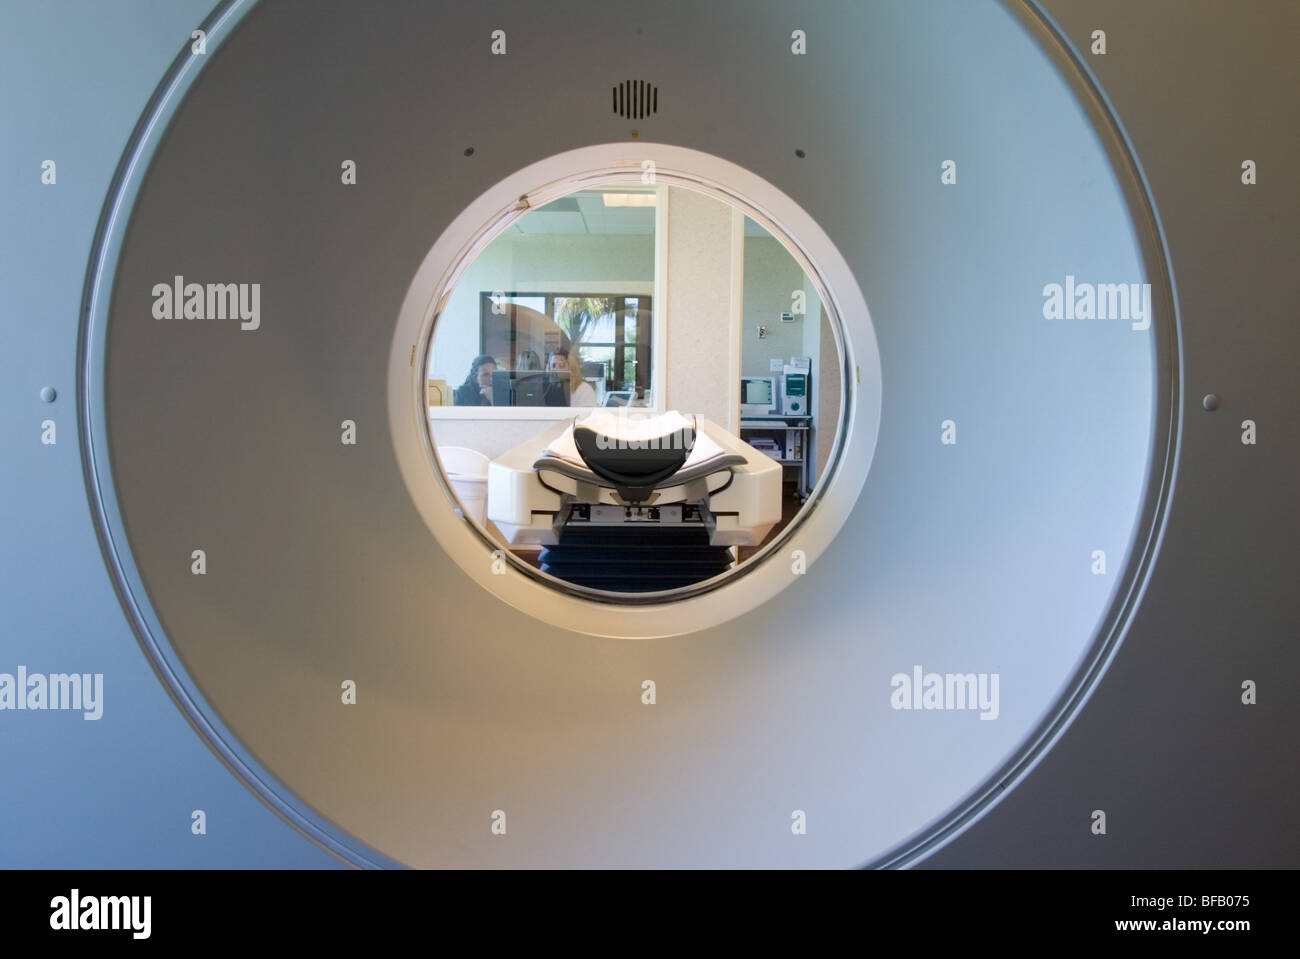 New medical imaging device, cat scan machine. Stock Photo